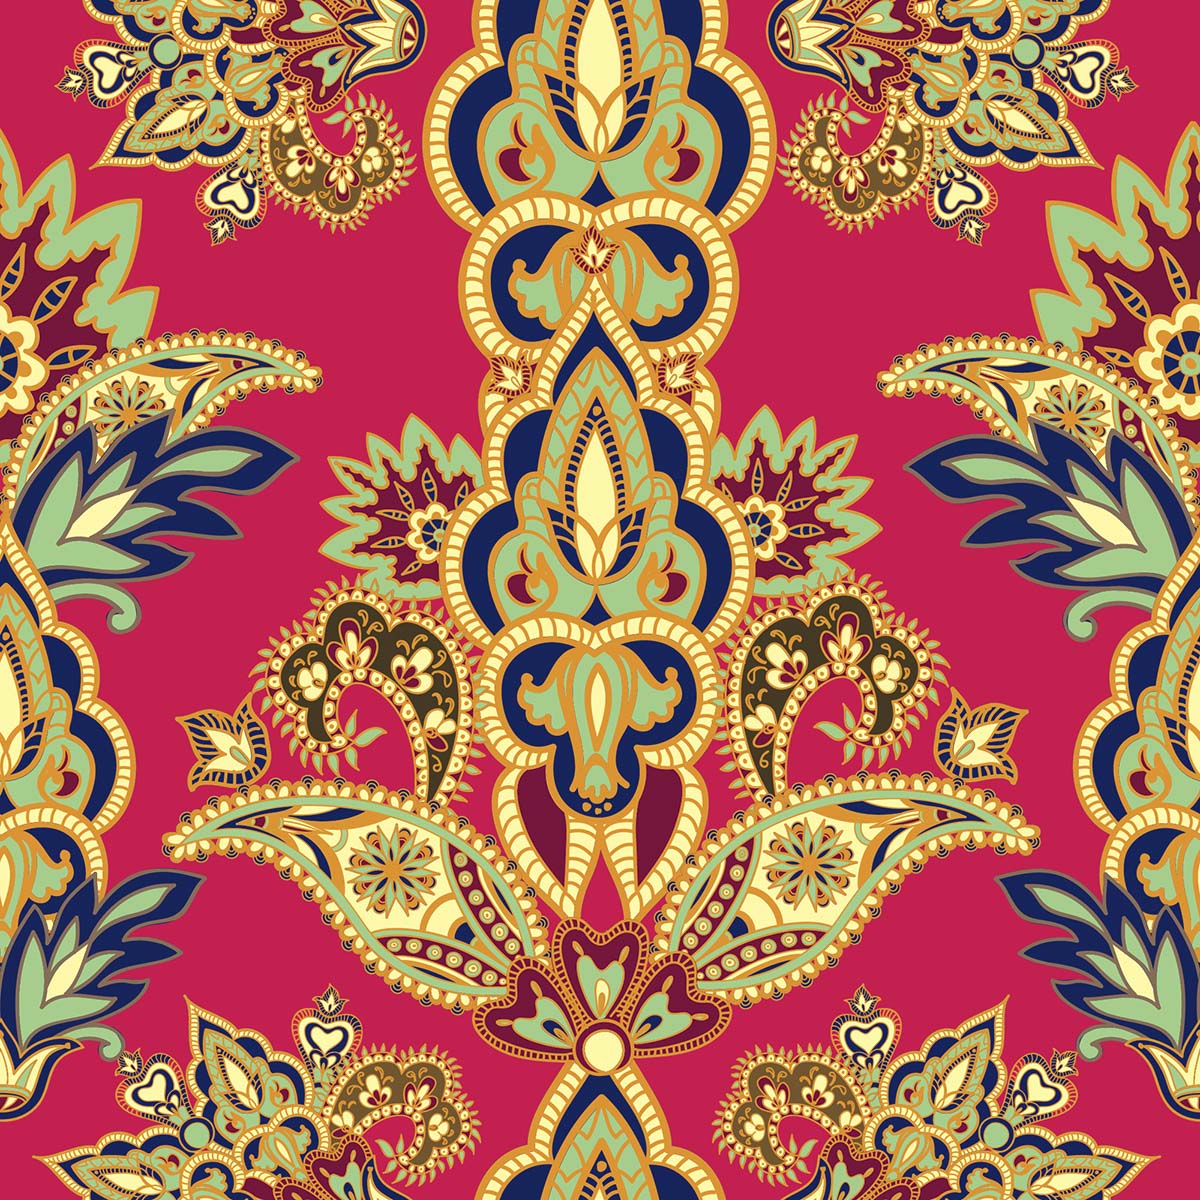 A colorful paisley pattern on a red background